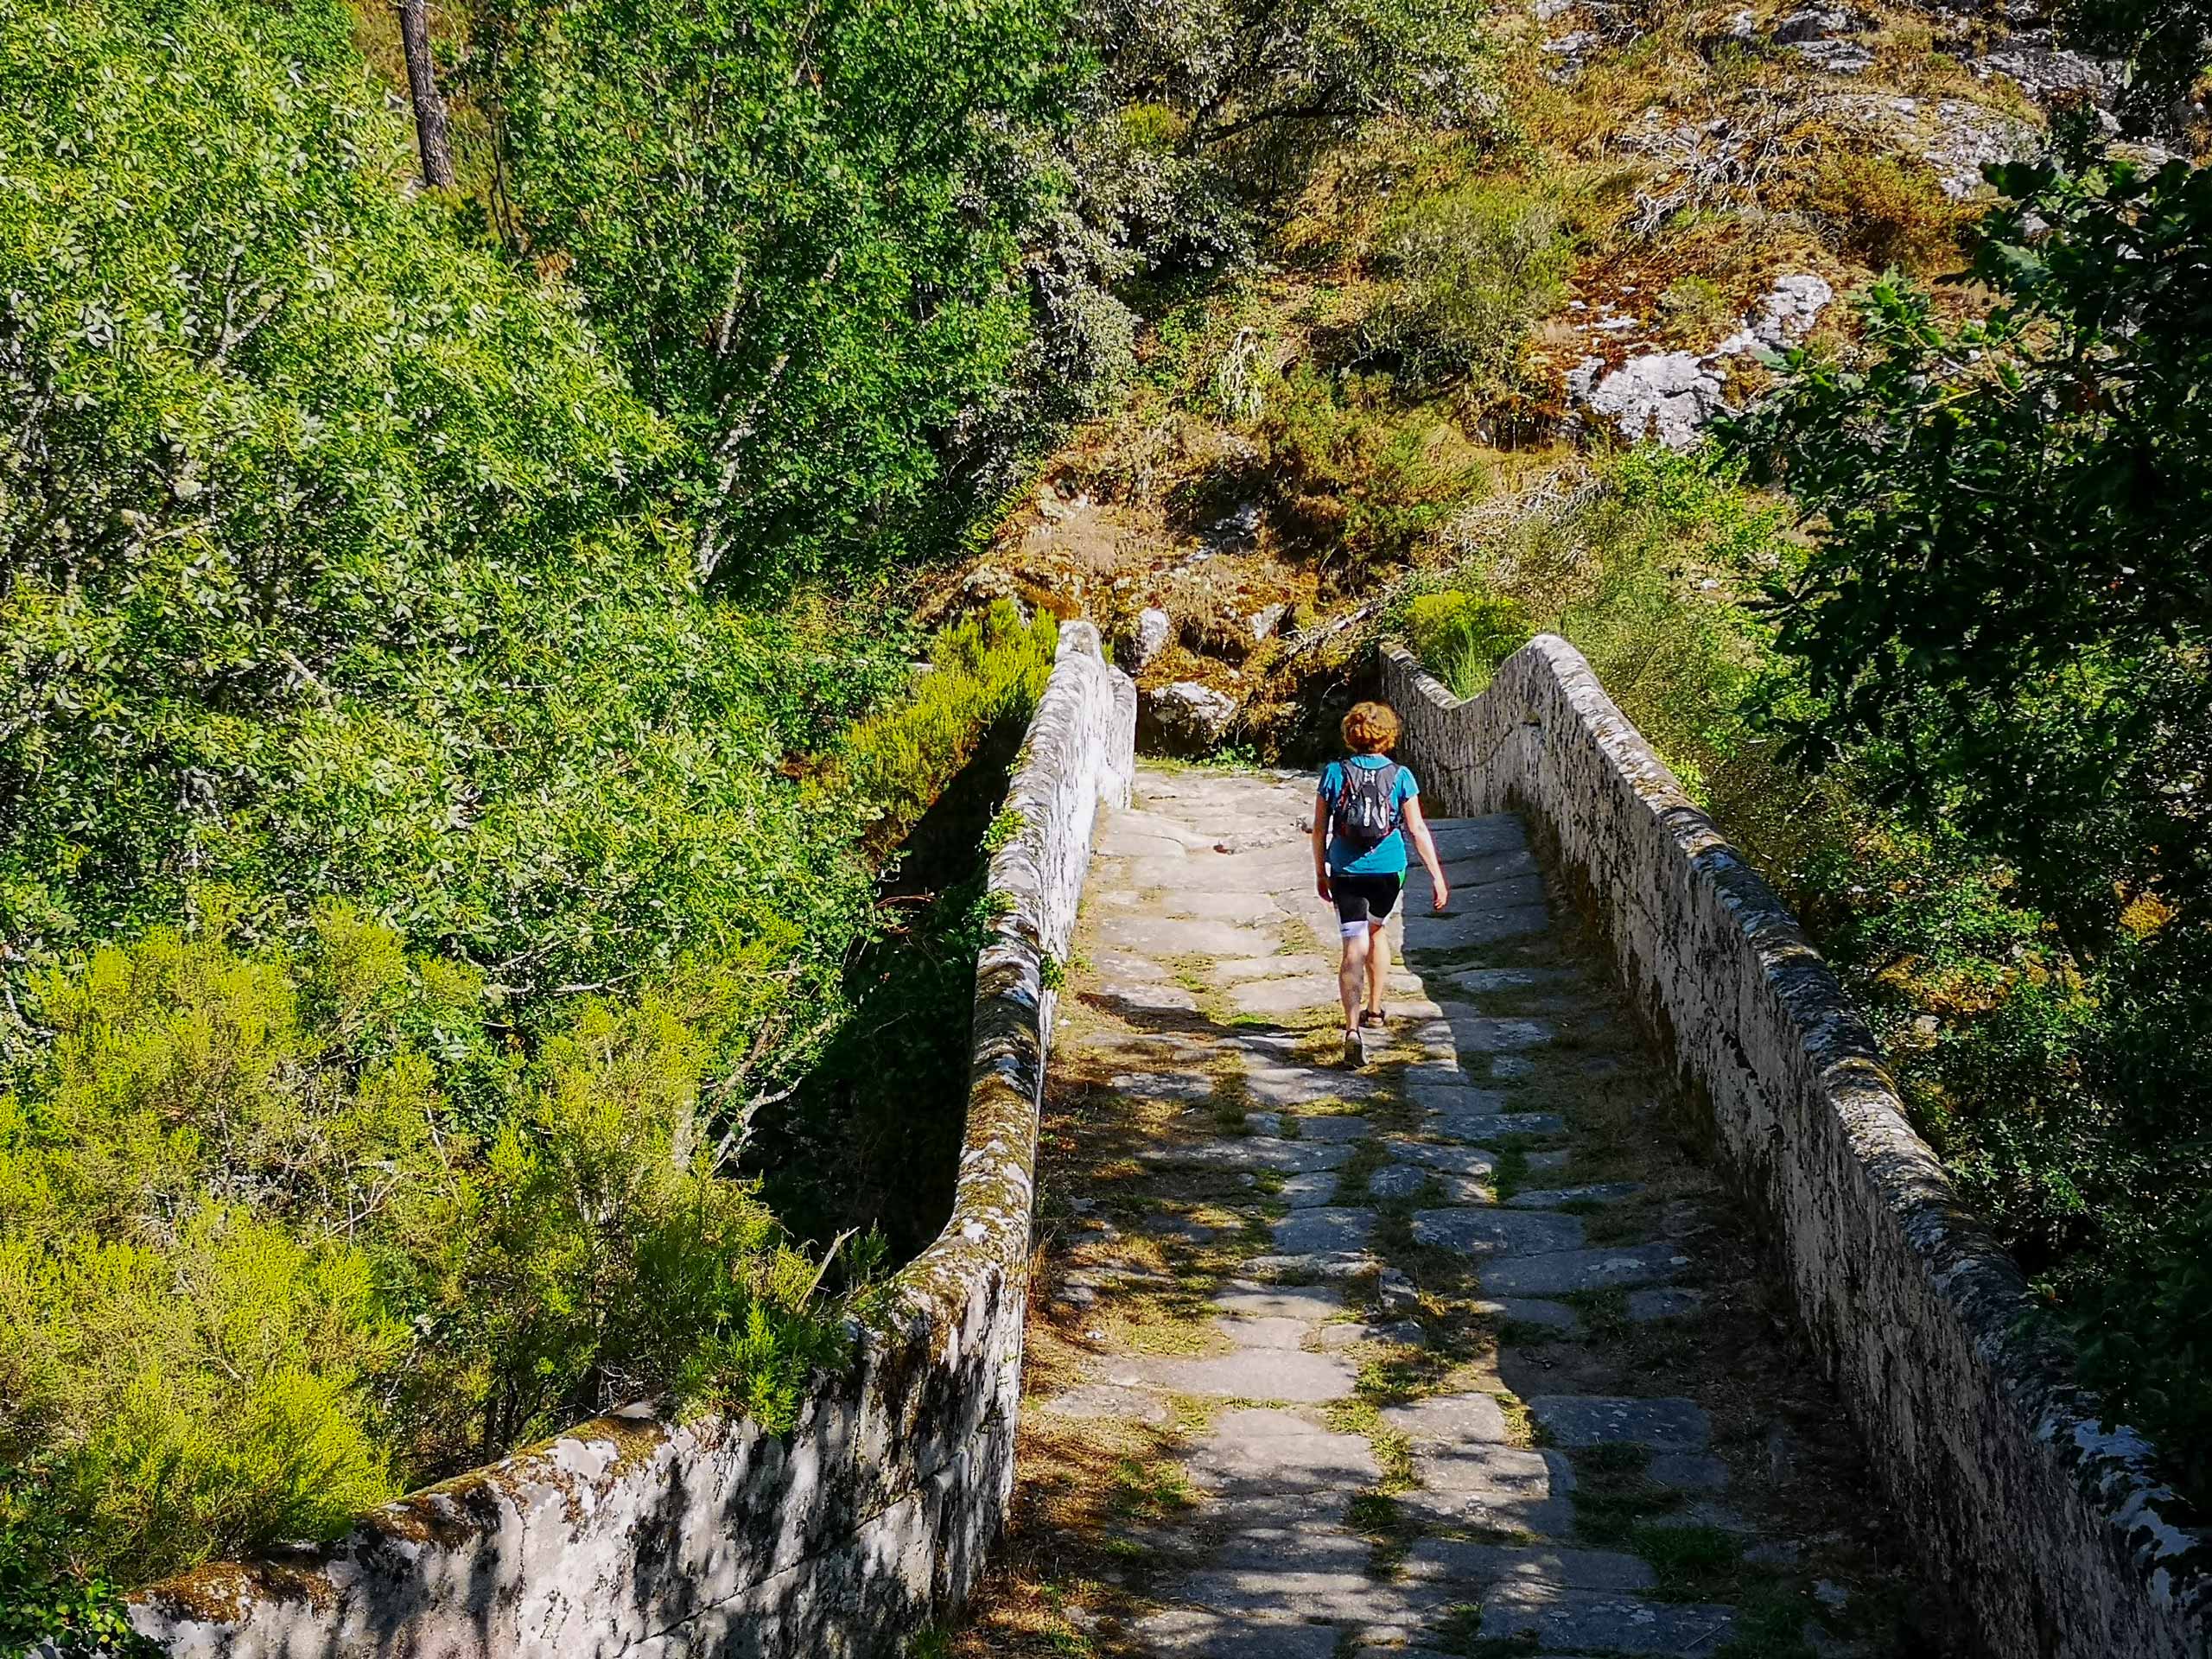 Crossing old stone bridge in the forest along hiking trail Camino Sanabres Spain